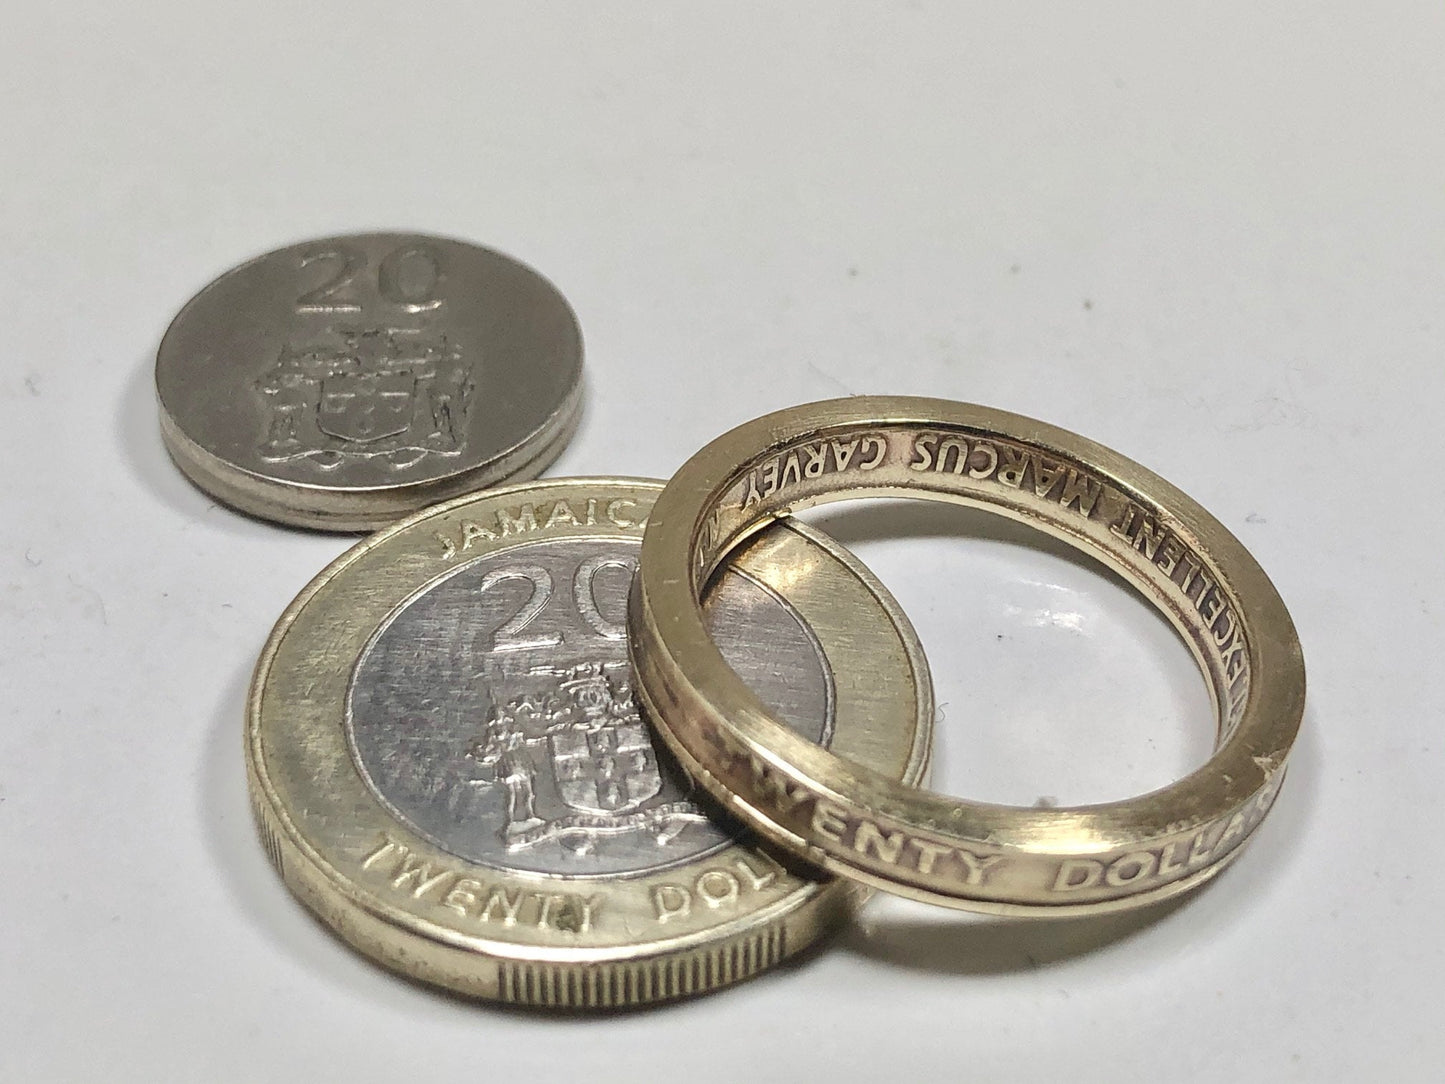 Jamaica Coin Ring Jamaican Twenty Dollar Handmade Personal Jewelry Ring Gift For Friend Coin Ring Gift For Him Her World Coin Collector